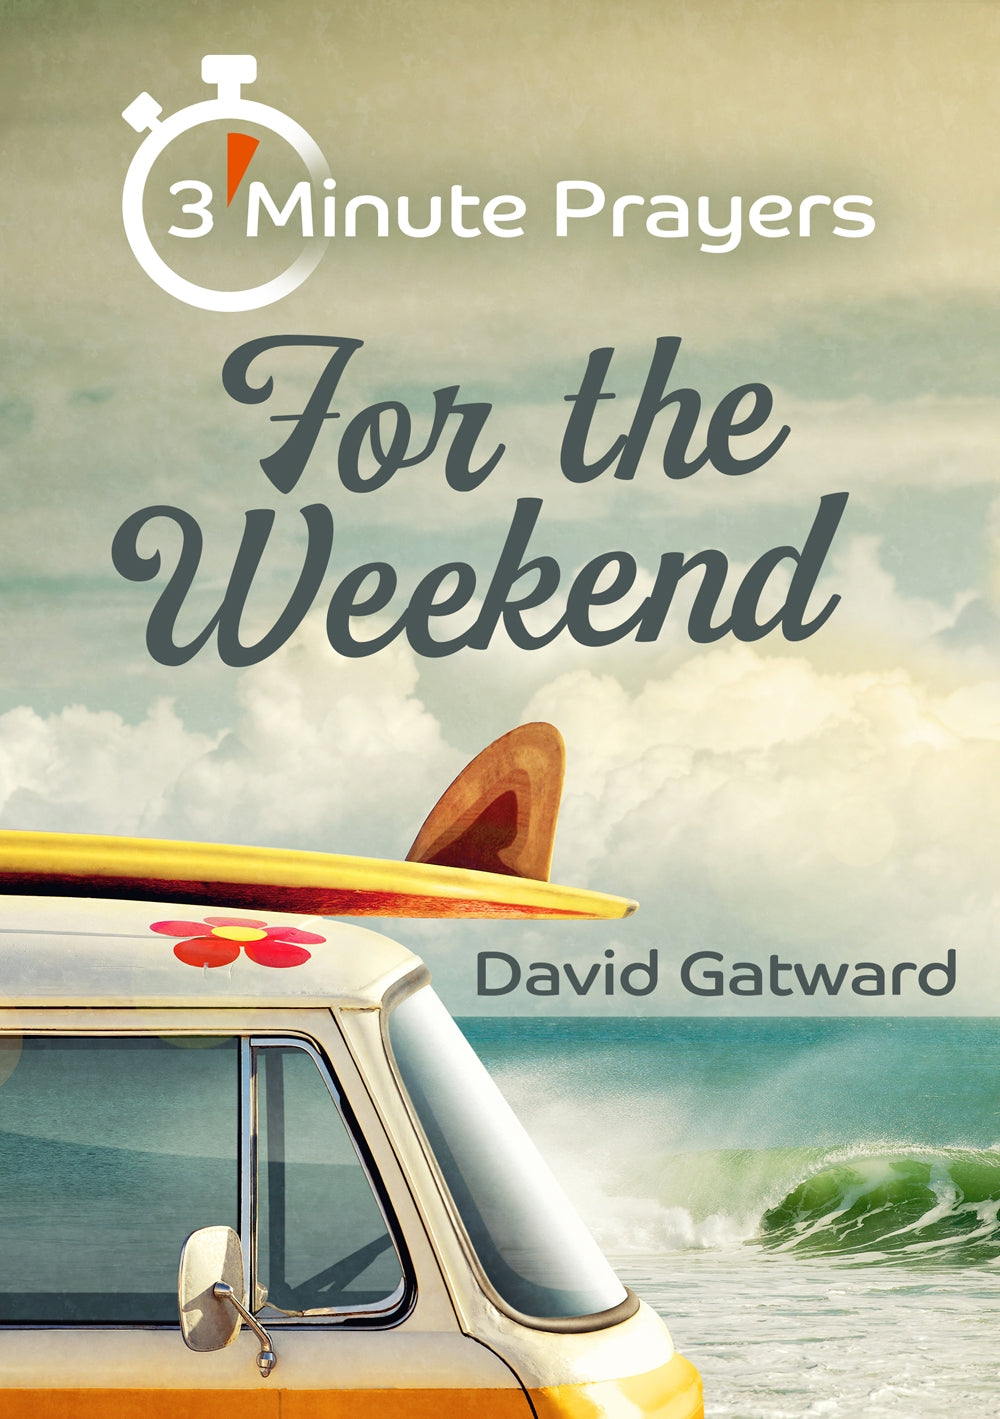 3 Minute Prayers For The Weekend3 Minute Prayers For The Weekend